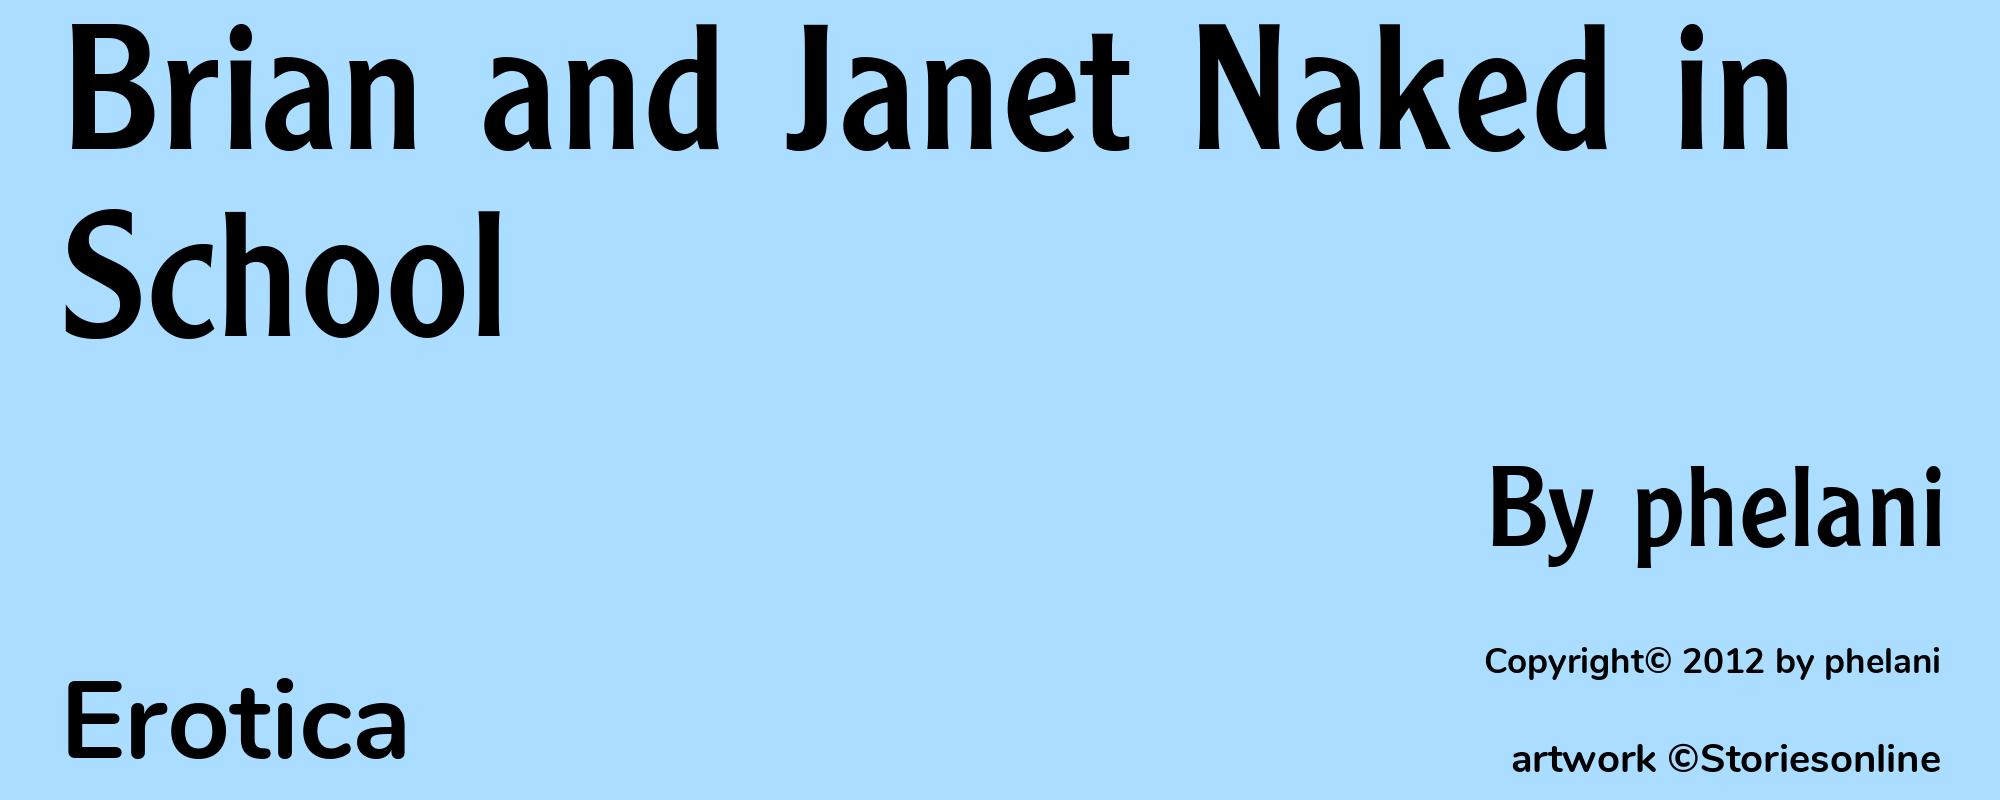 Brian and Janet Naked in School - Cover